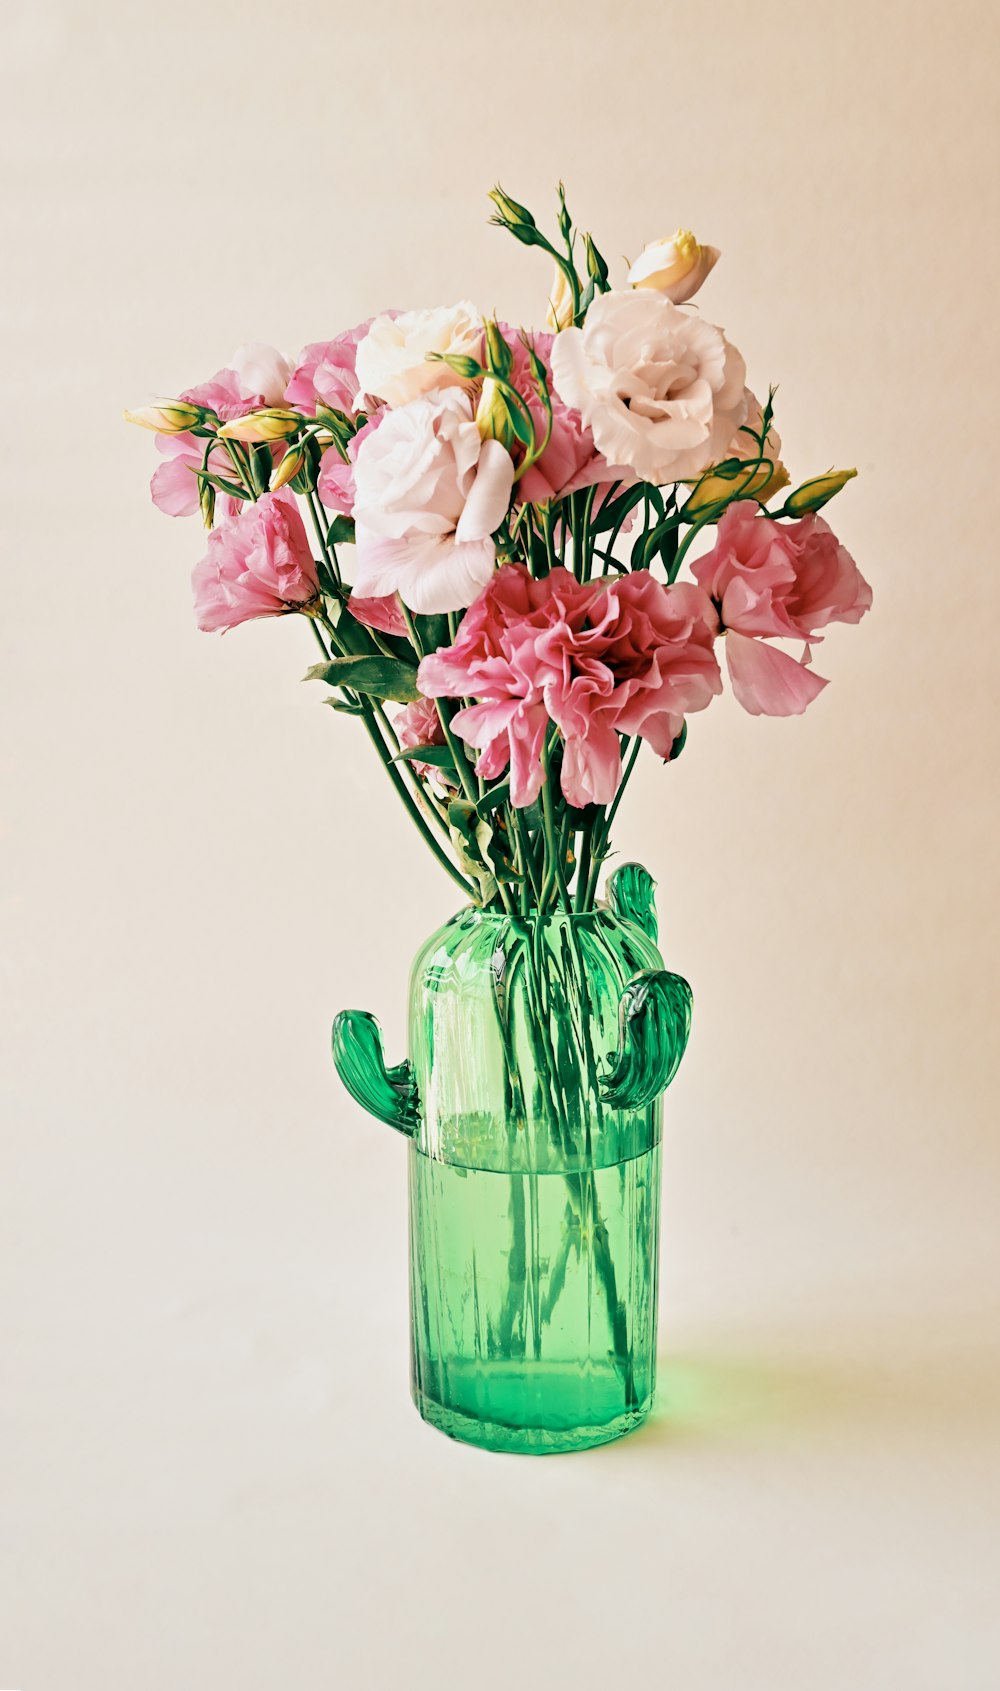 pink and white flowers in green glass vase